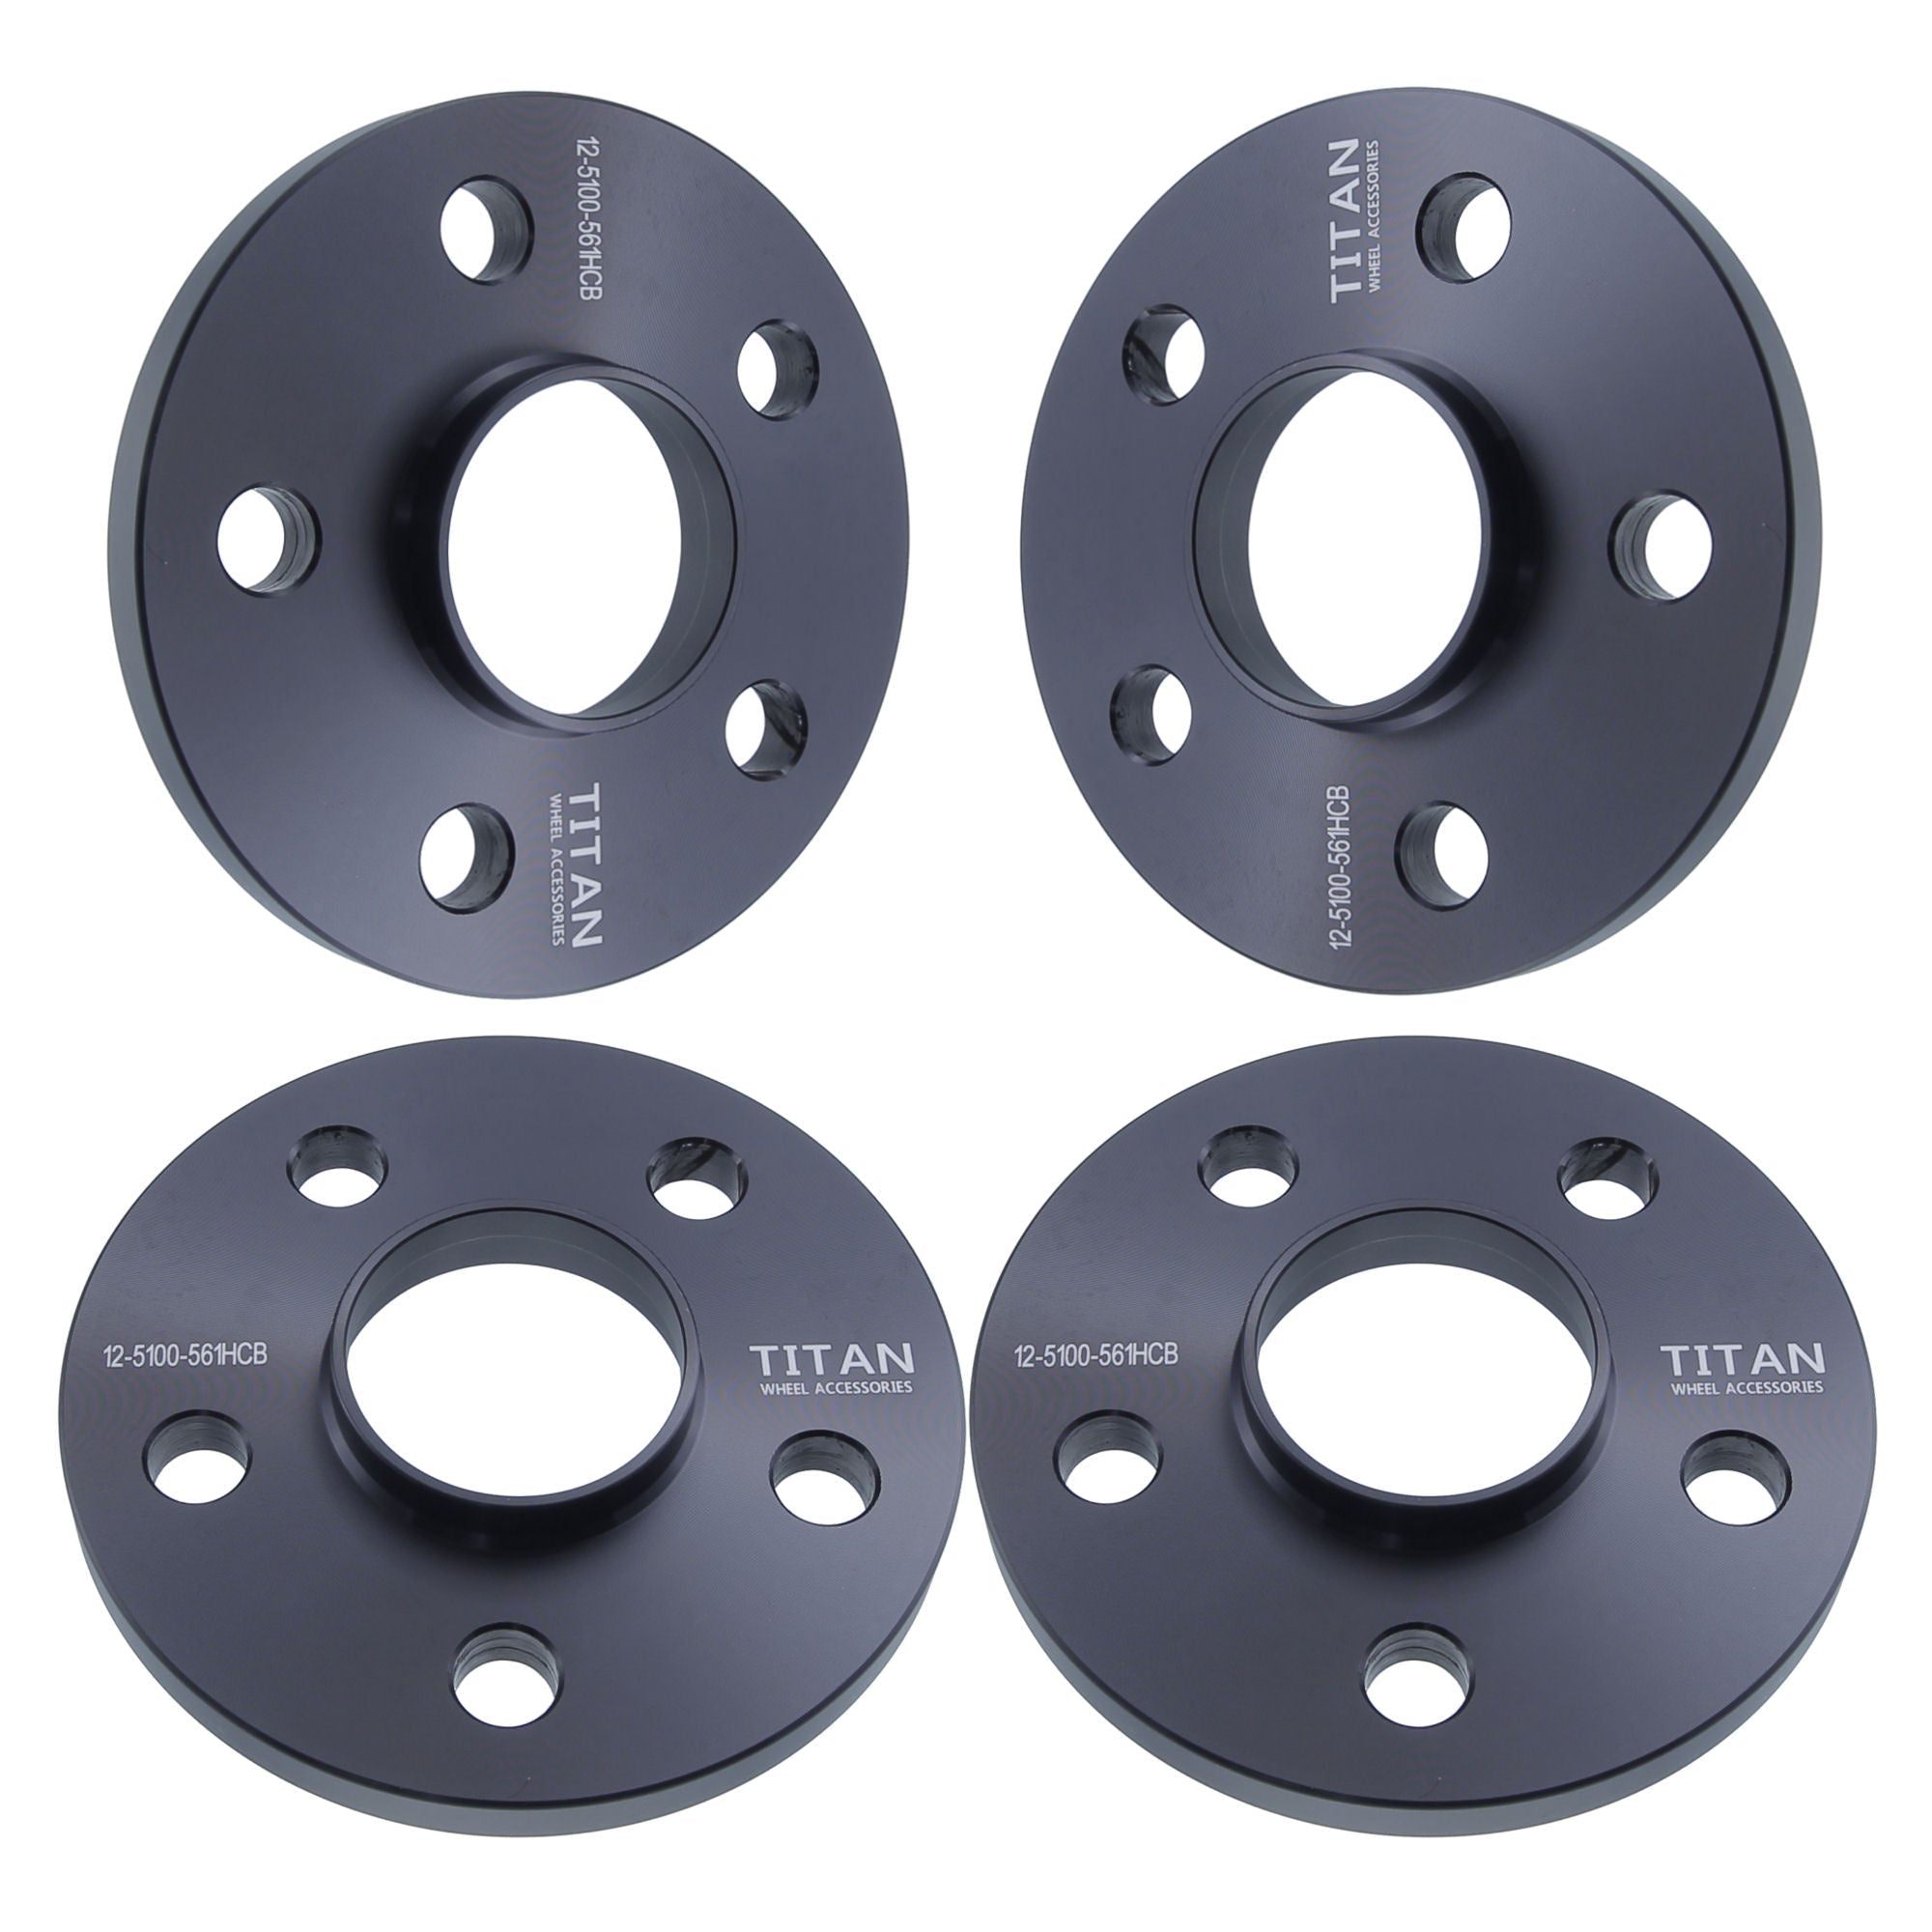 12mm Wheel Spacers for Scion FRS Subaru Impreza BRZ | 5x100 | 56.1  Hubcentric | - Set of 4